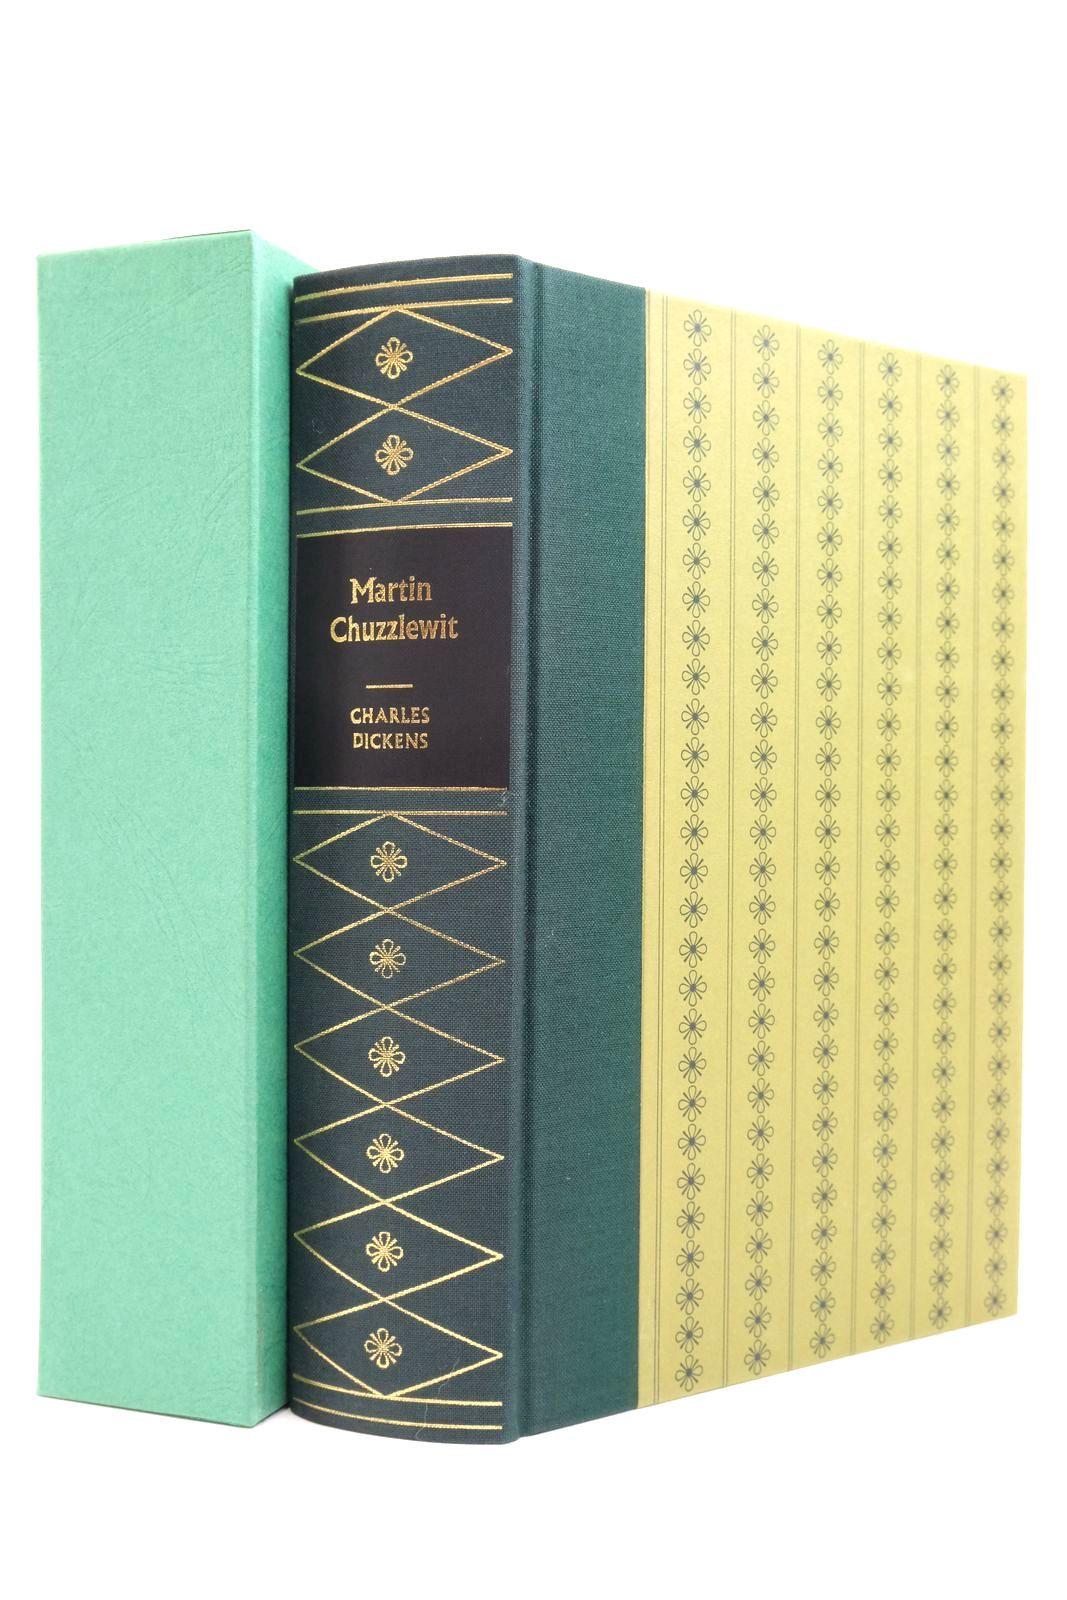 Photo of THE LIFE AND ADVENTURES OF MARTIN CHUZZLEWIT- Stock Number: 2138513